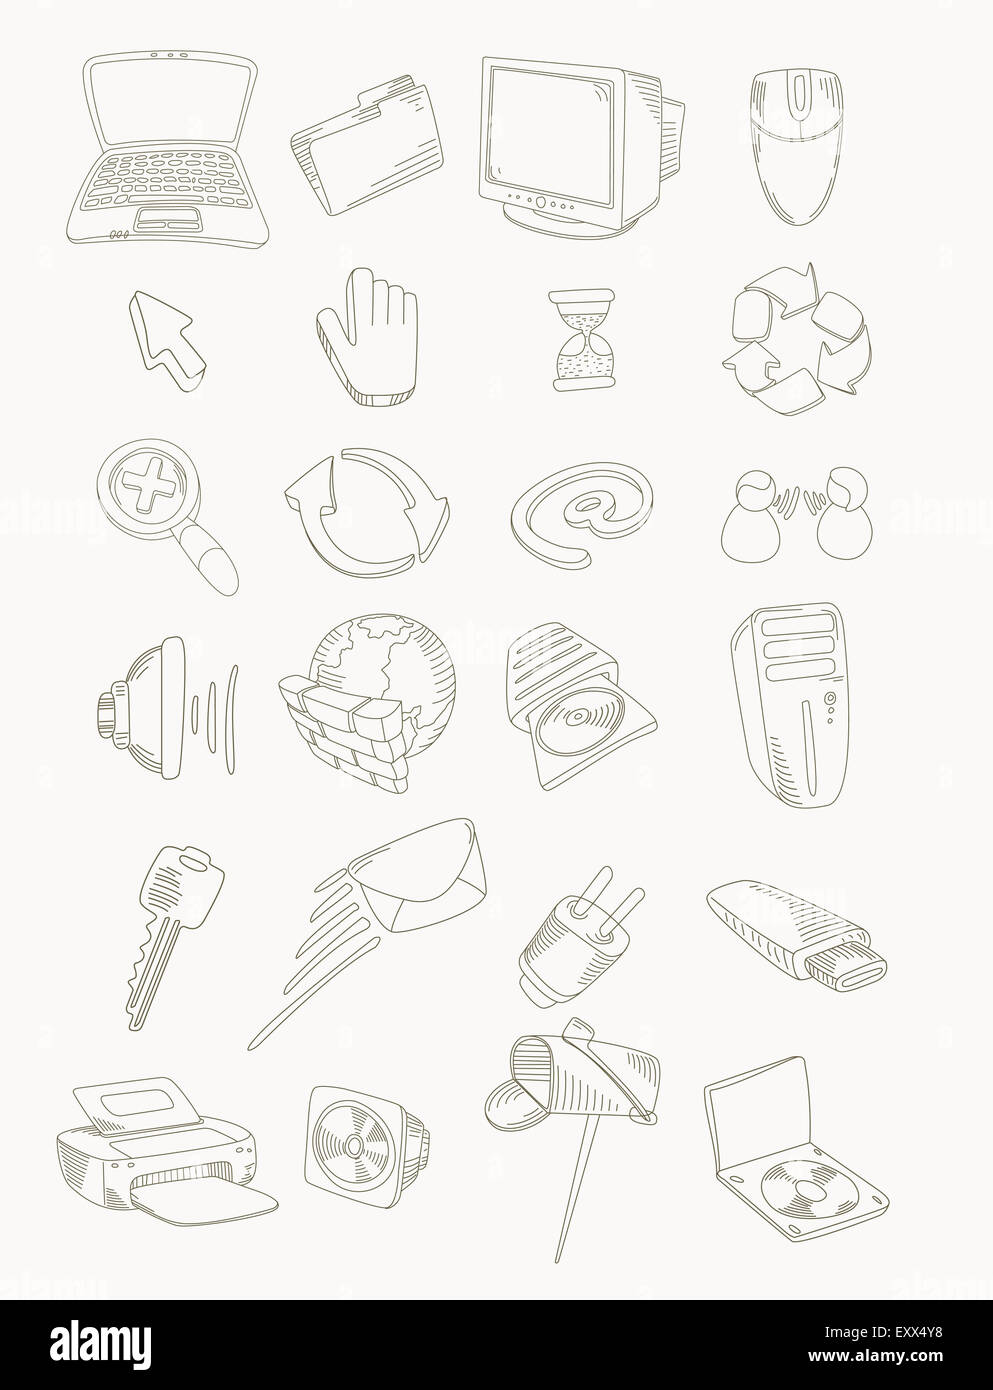 Line drawing computer icons Stock Photo